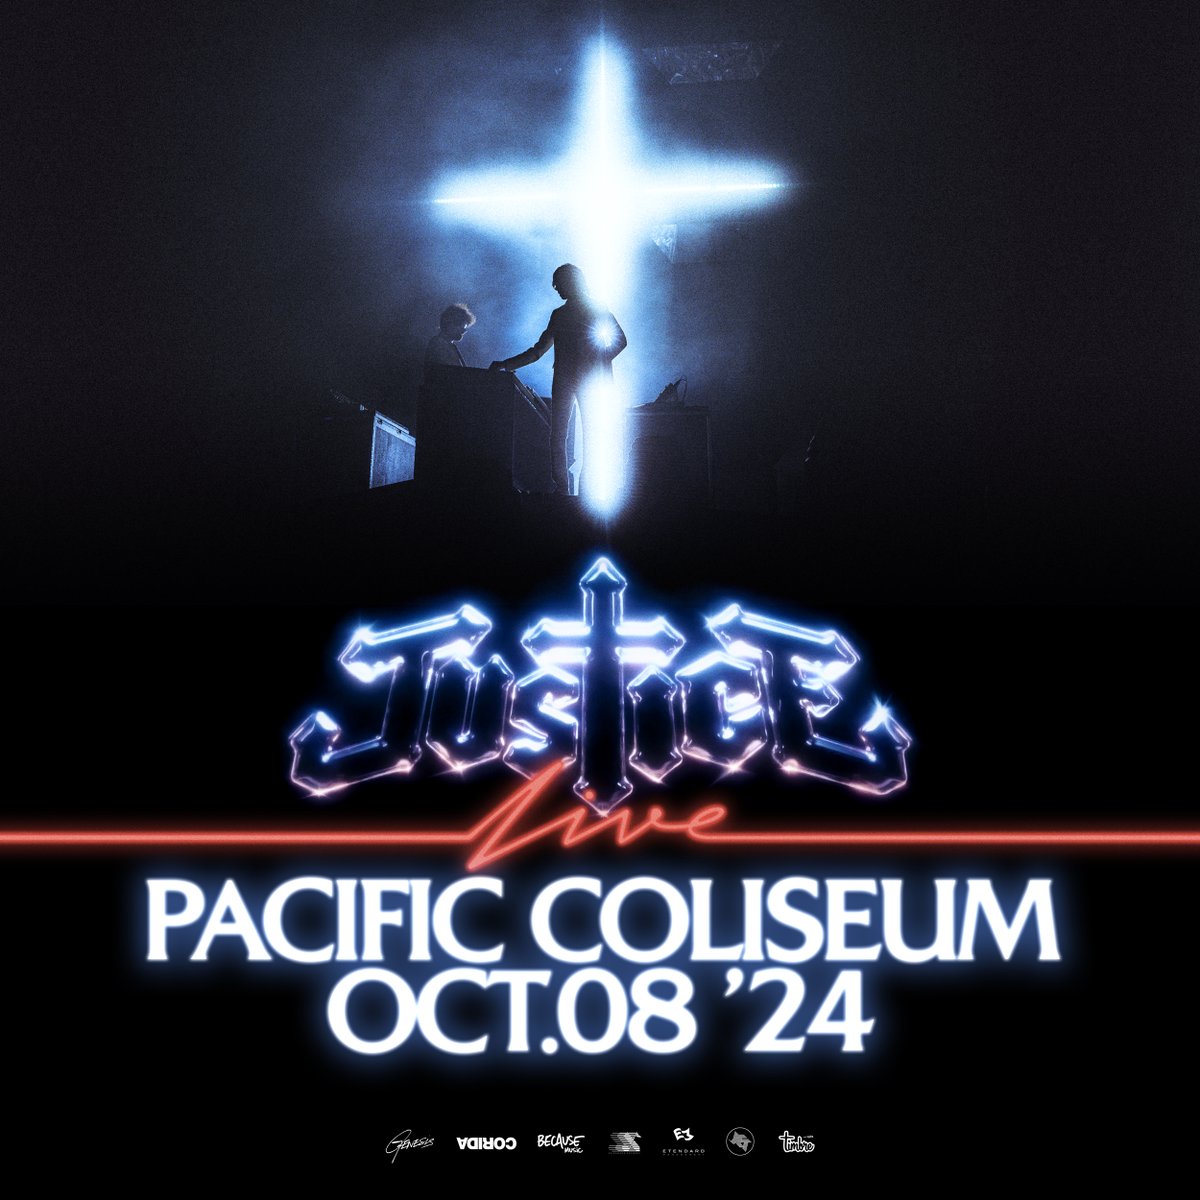 JUST ANNOUNCED! 
JUSTICE: LIVE
With Guests
October 8, 2024 @ PACIFIC COLISEUM #Vancouver
Tickets on sale Friday!